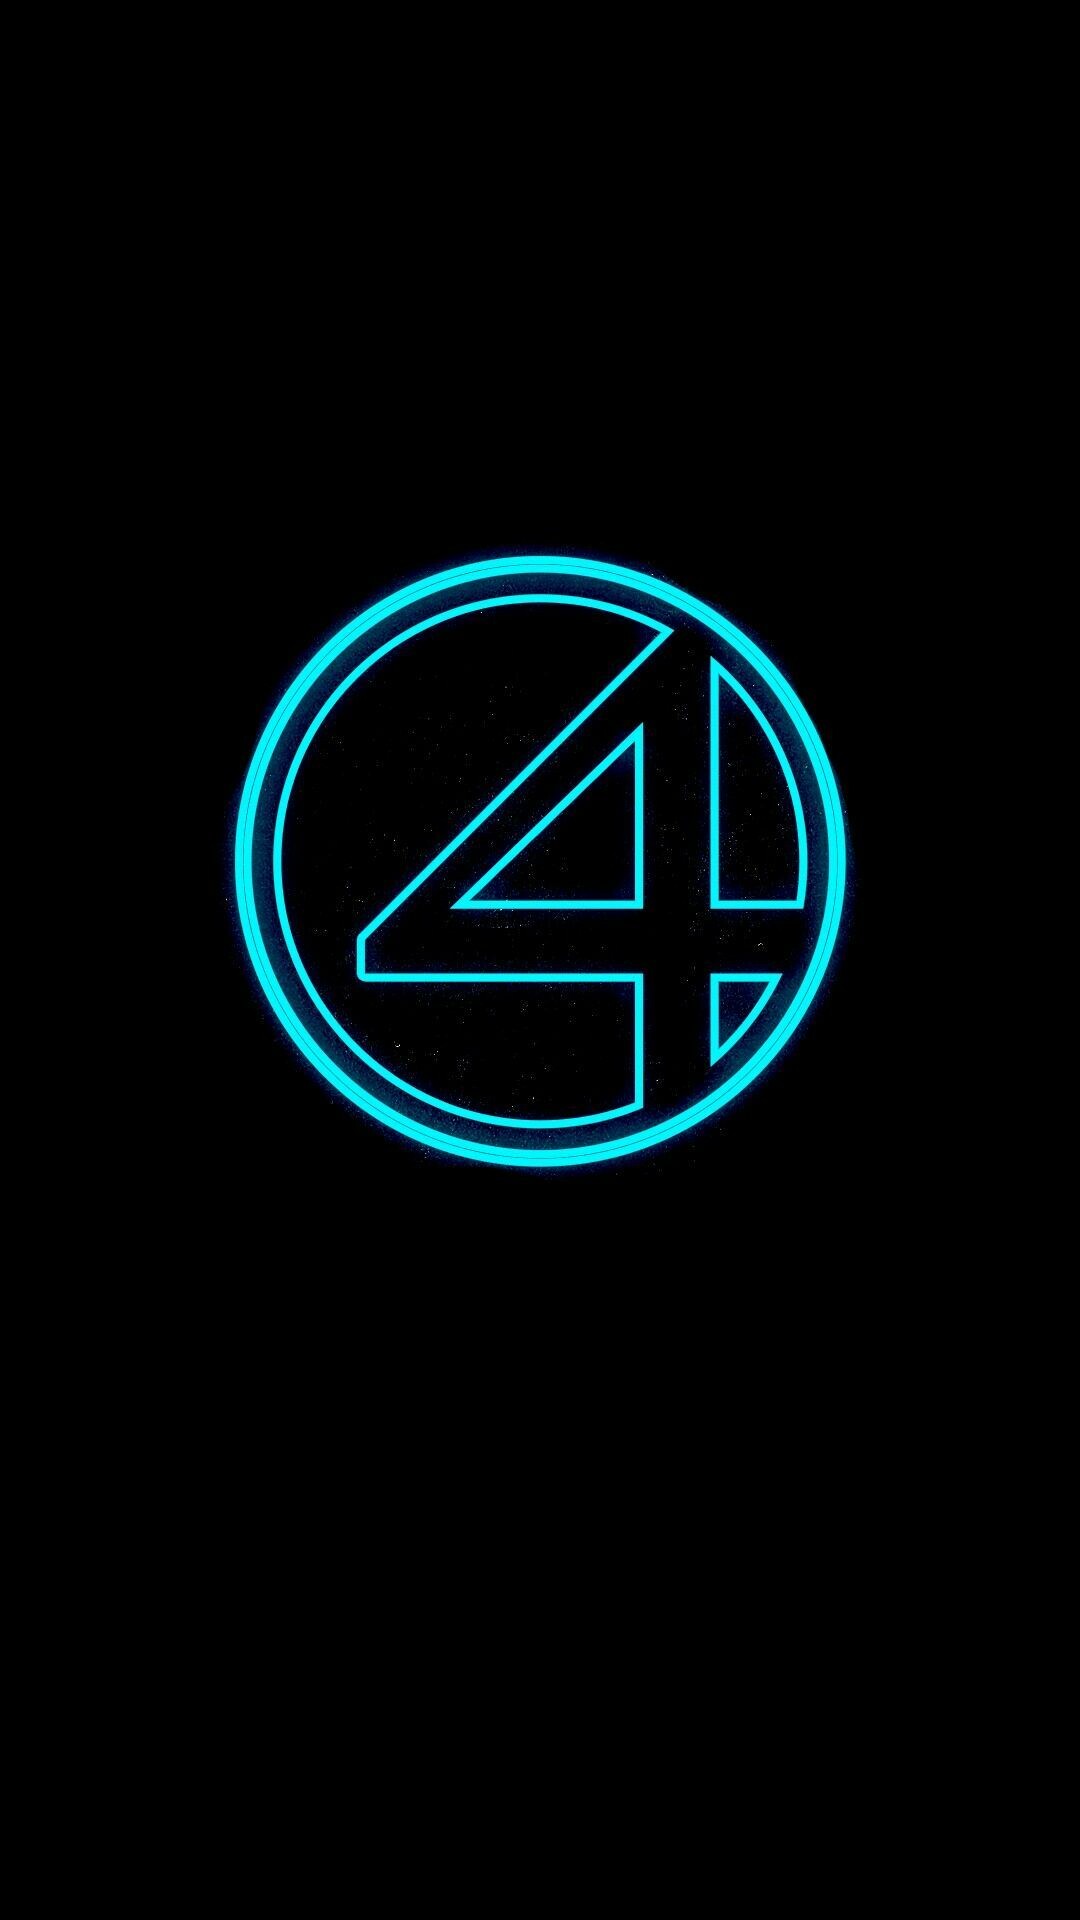 Fantastic 4: A story of fictional characters who gained superpowers after exposure to cosmic rays. 1080x1920 Full HD Background.